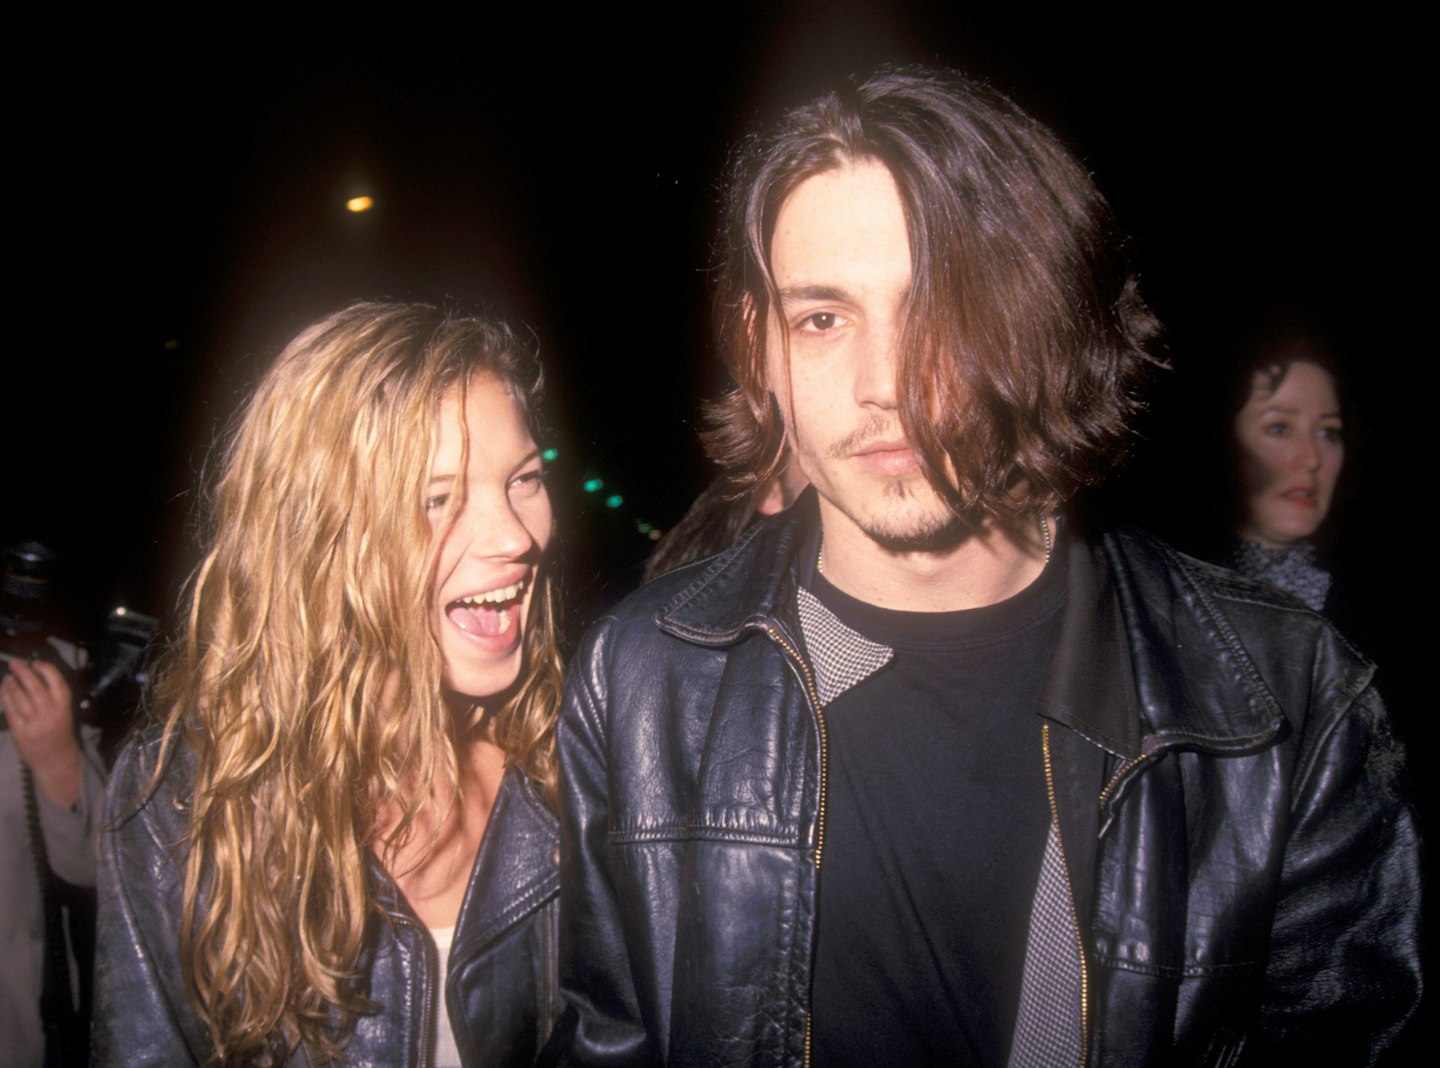 1994 – Kate Moss and Johnny Depp